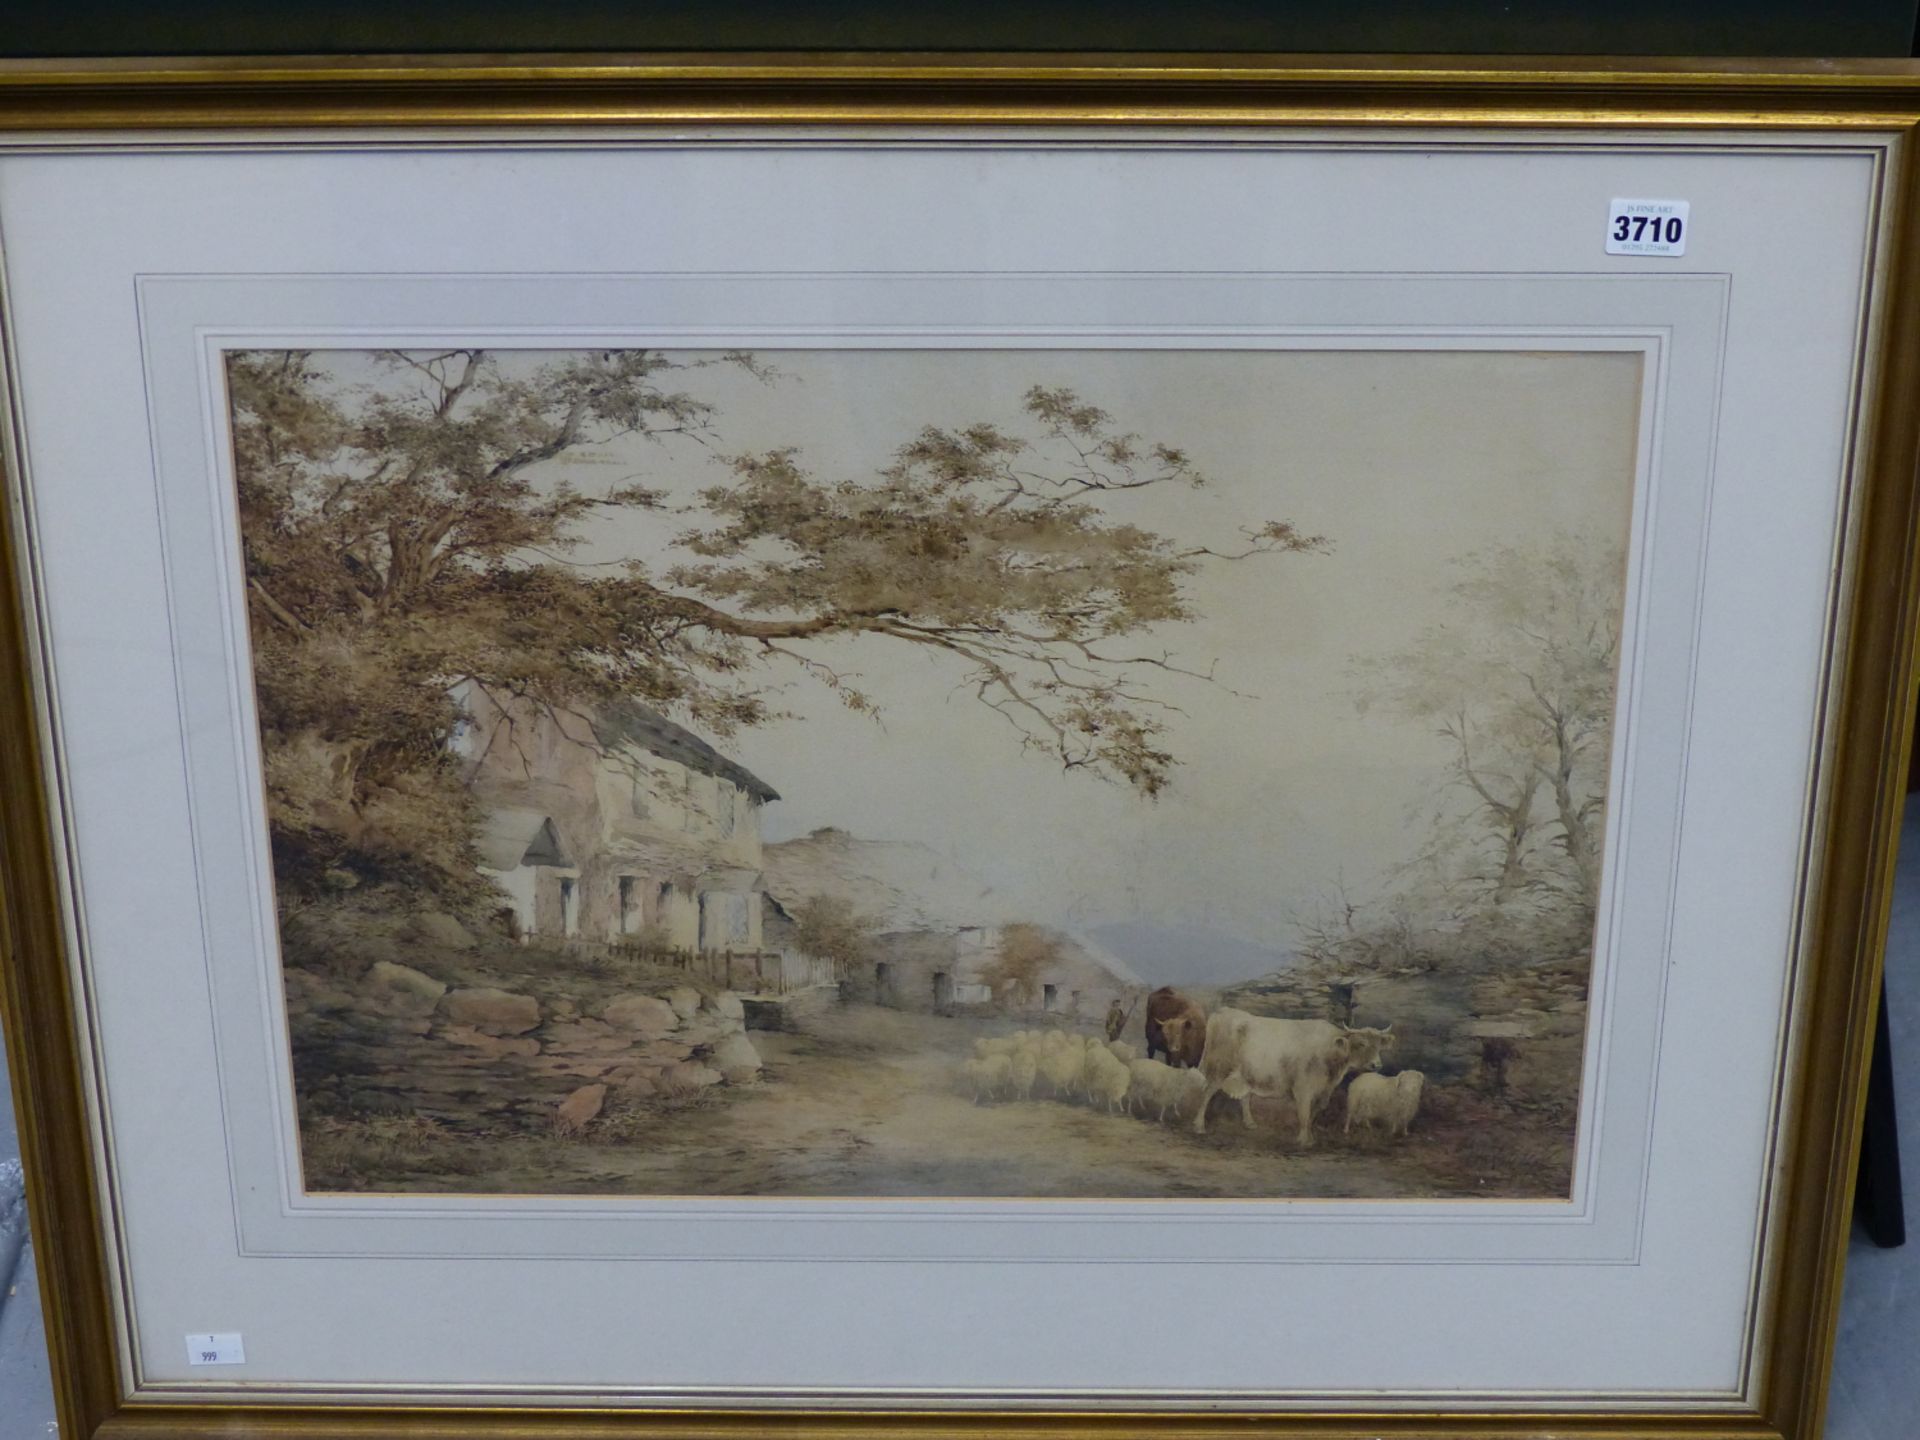 T. KET. ( 19TH CENTURY) FARMYARD WITH CATTLE AND SHEEP. WATERCOLOUR. SIGNED INDISTINCTLY L/R. 56.5 X - Image 6 of 8